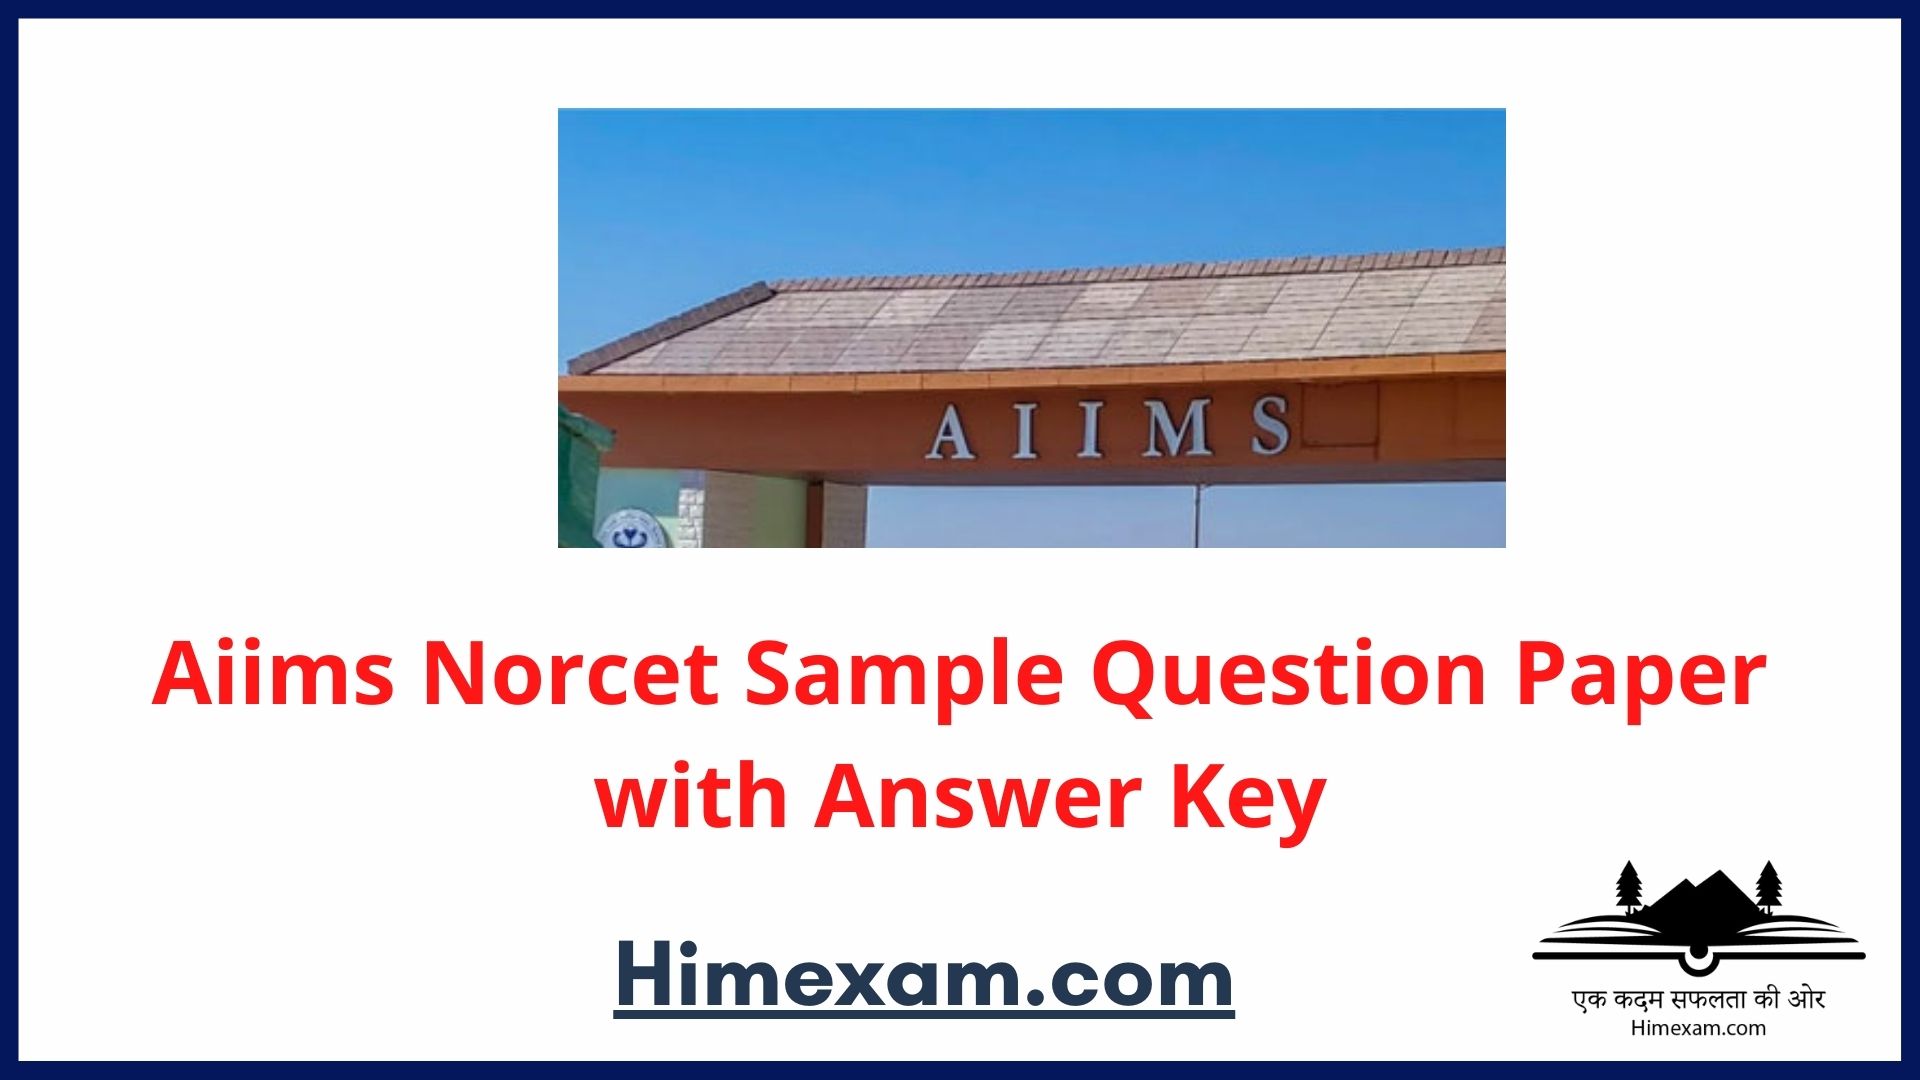 Aiims Norcet Sample Question Paper with Answer Key